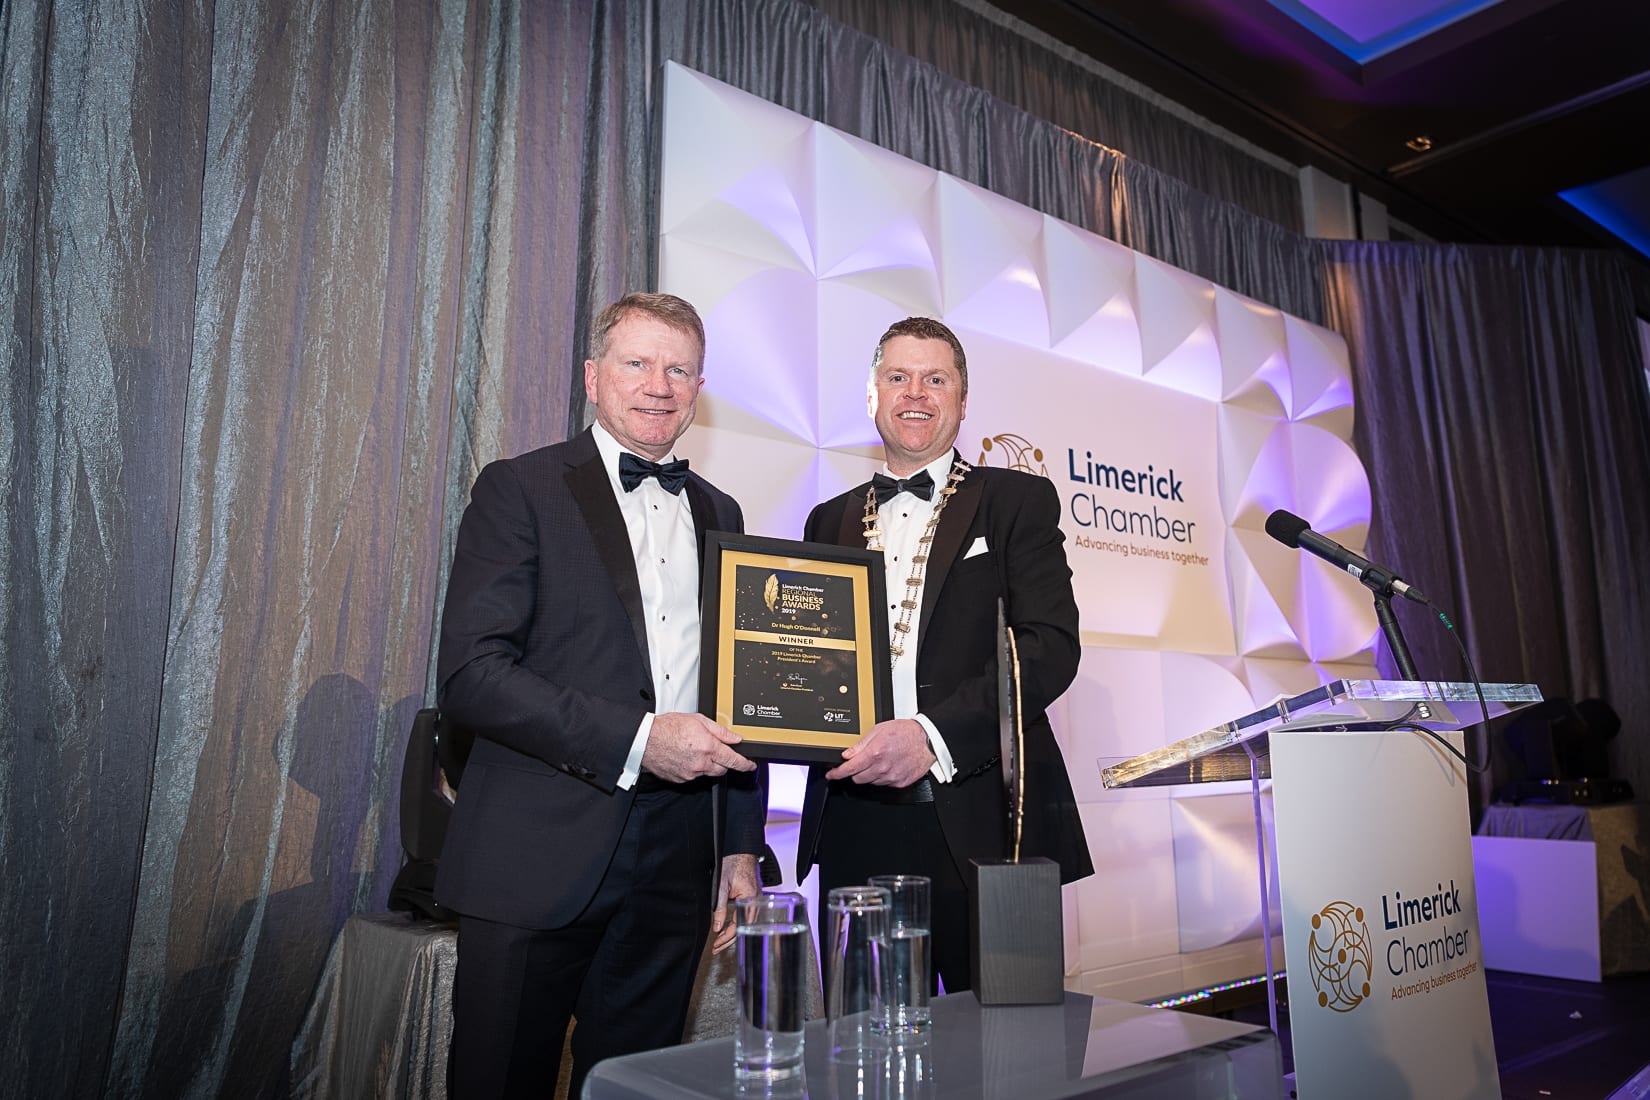 No repro fee-Limerick Chamber President’s Dinner
and Limerick Chamber Regional Business Awards 2019 which was held in the Strand Hotel on Friday 15th November /President Award/  - From Left to Right: Dr Hugh O’Donnell - Winner, Eoin Ryan - President Limerick Chamber, 
Photo credit Shauna Kennedy